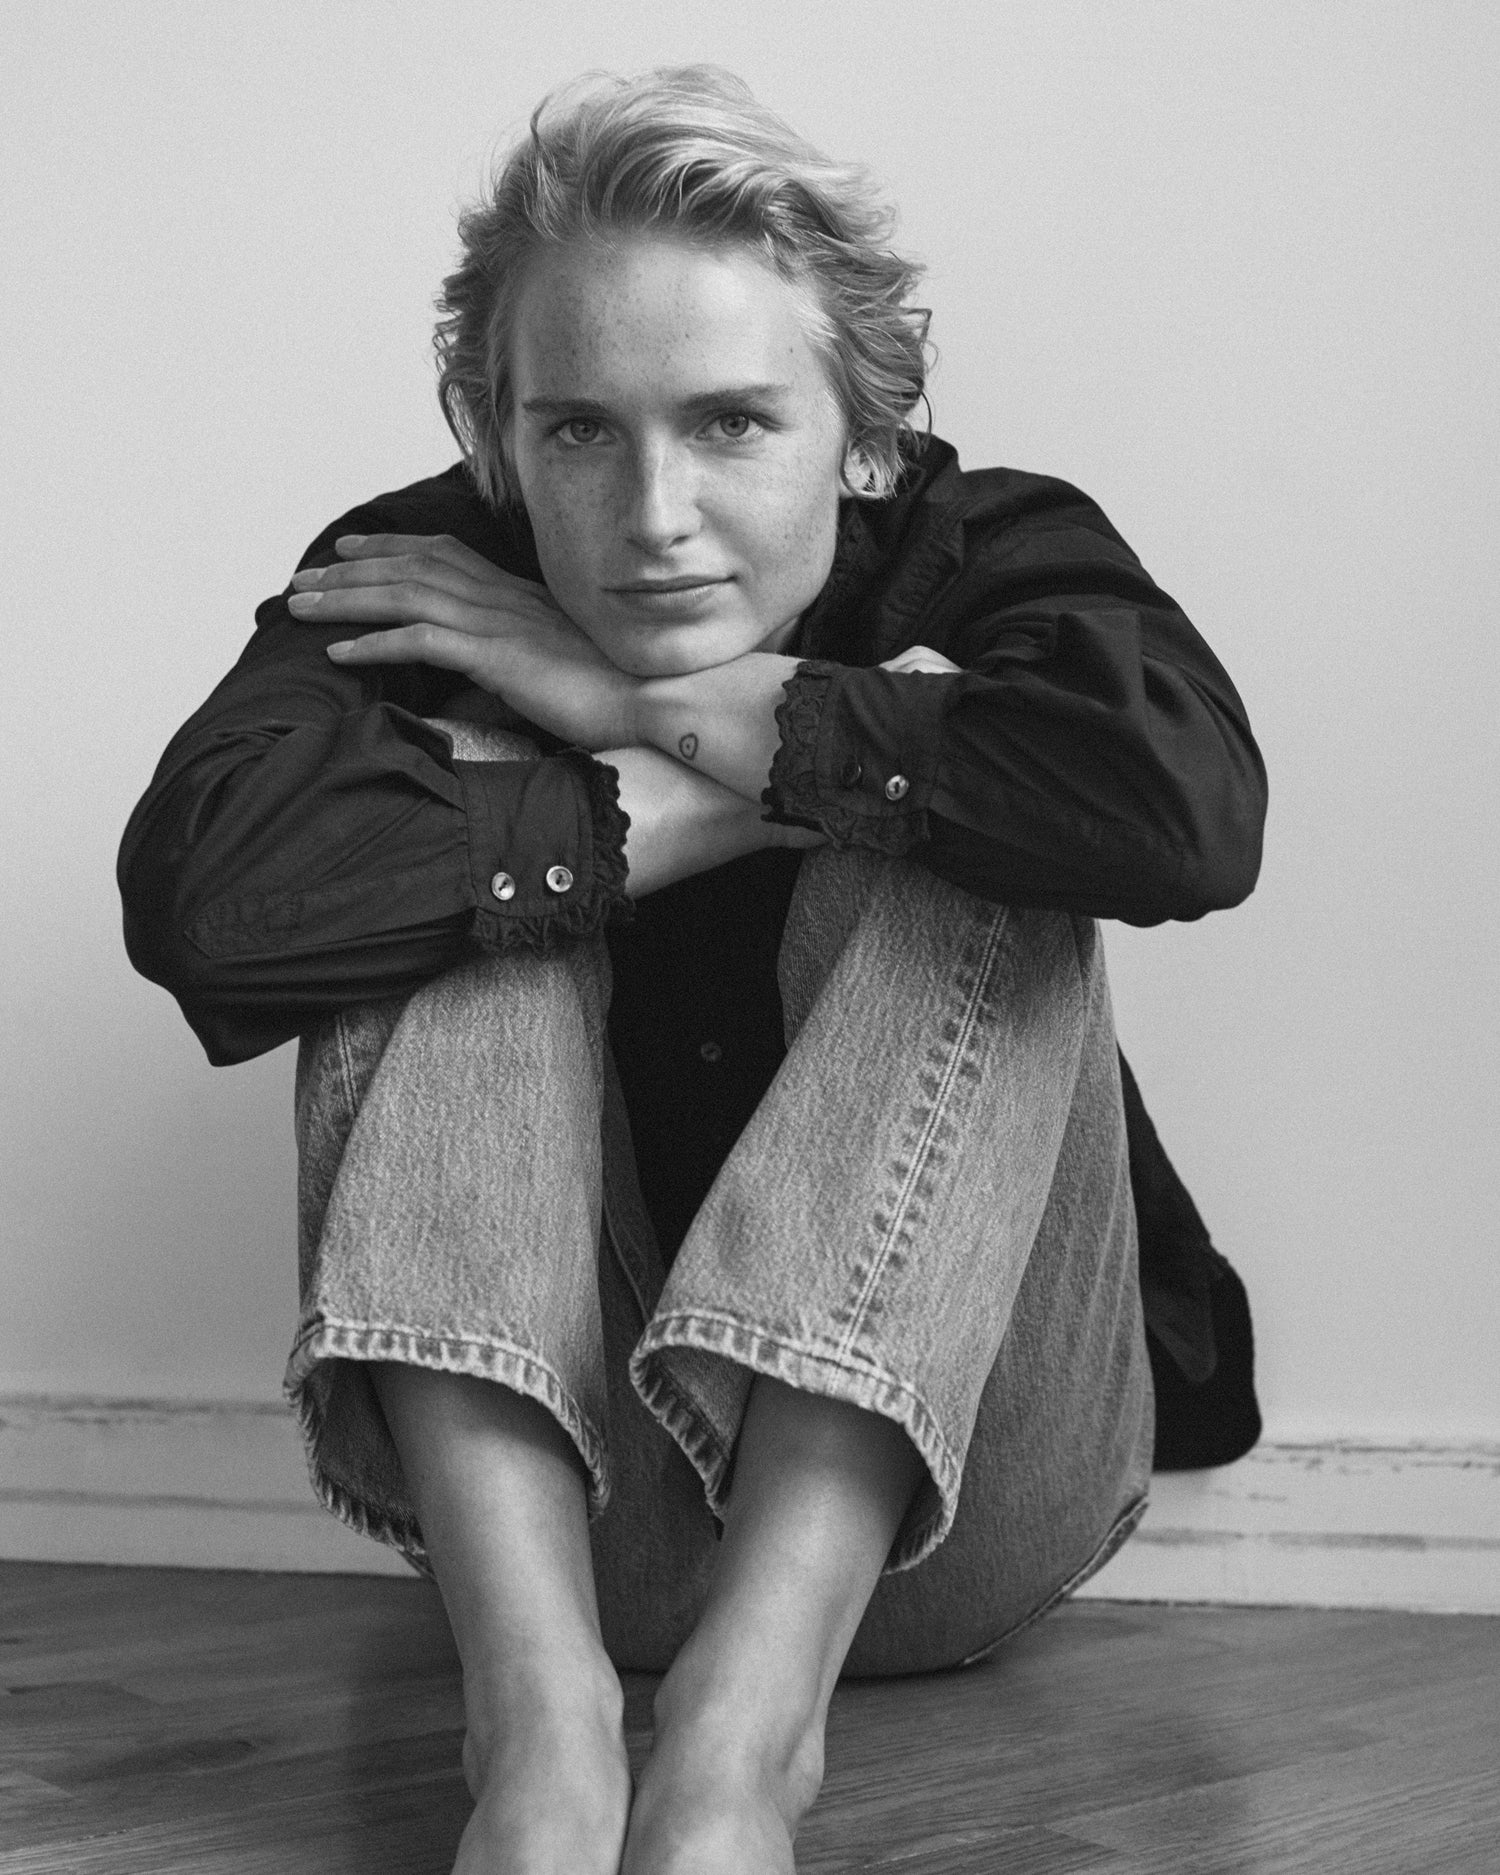 Woman sitting on the ground with her arms and head on her knees. She is wearing a long sleeve black blouse and jeans.